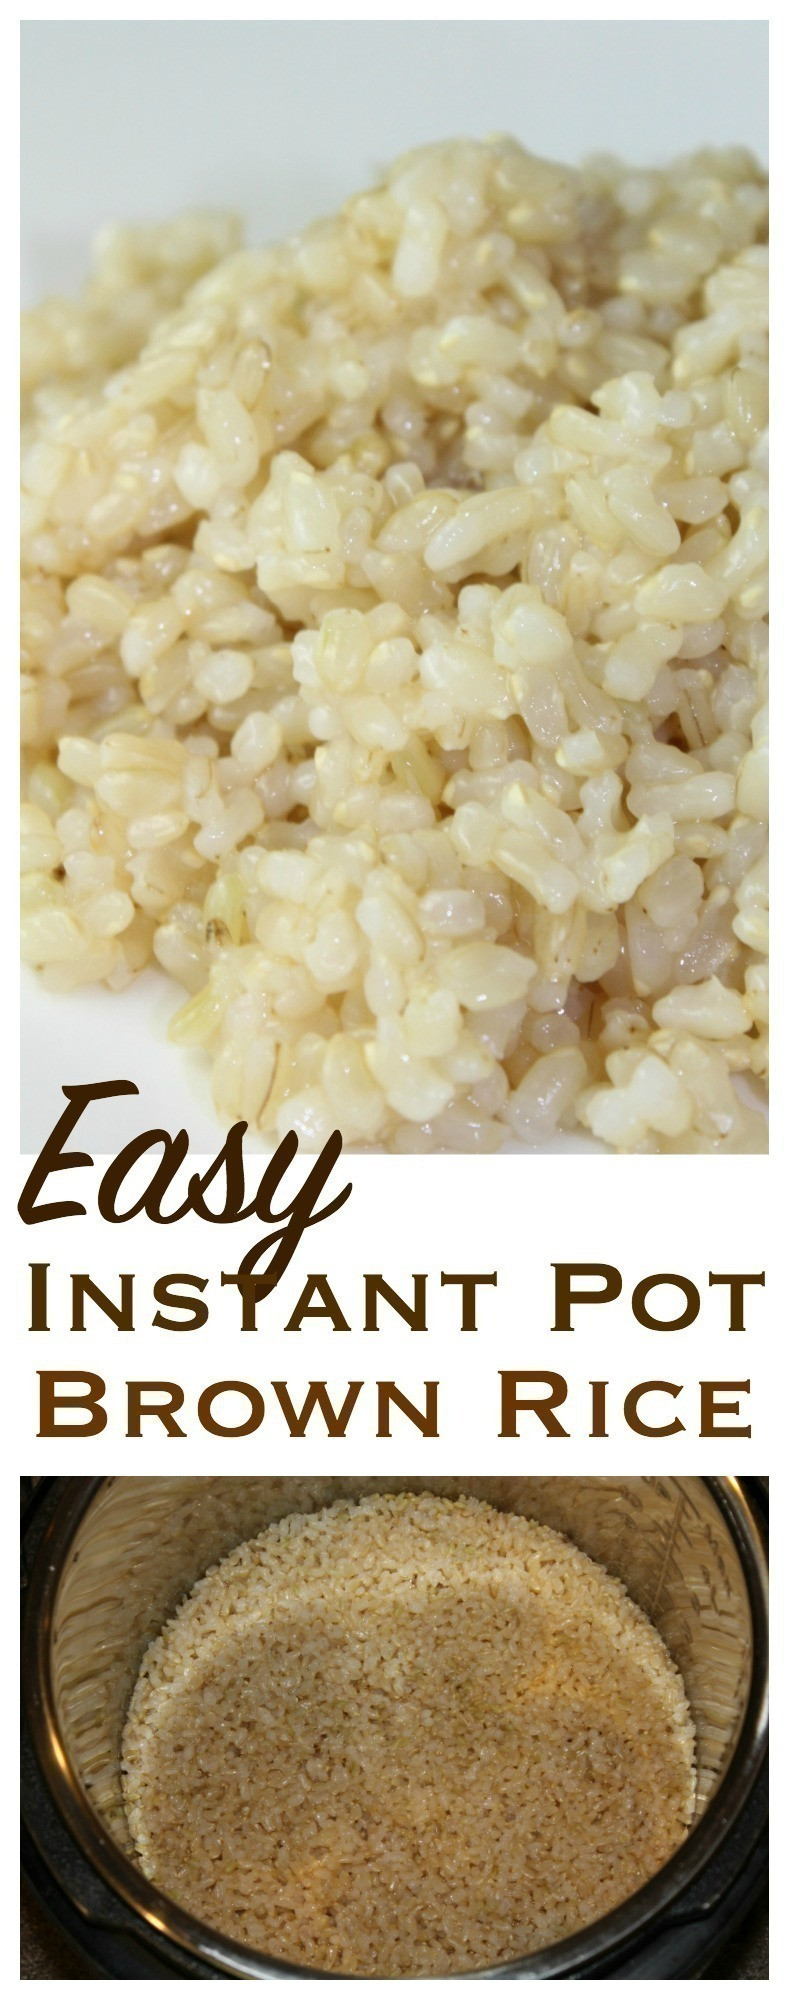 Brown Rice Instant Pot
 Easy Brown Rice in the Instant Pot